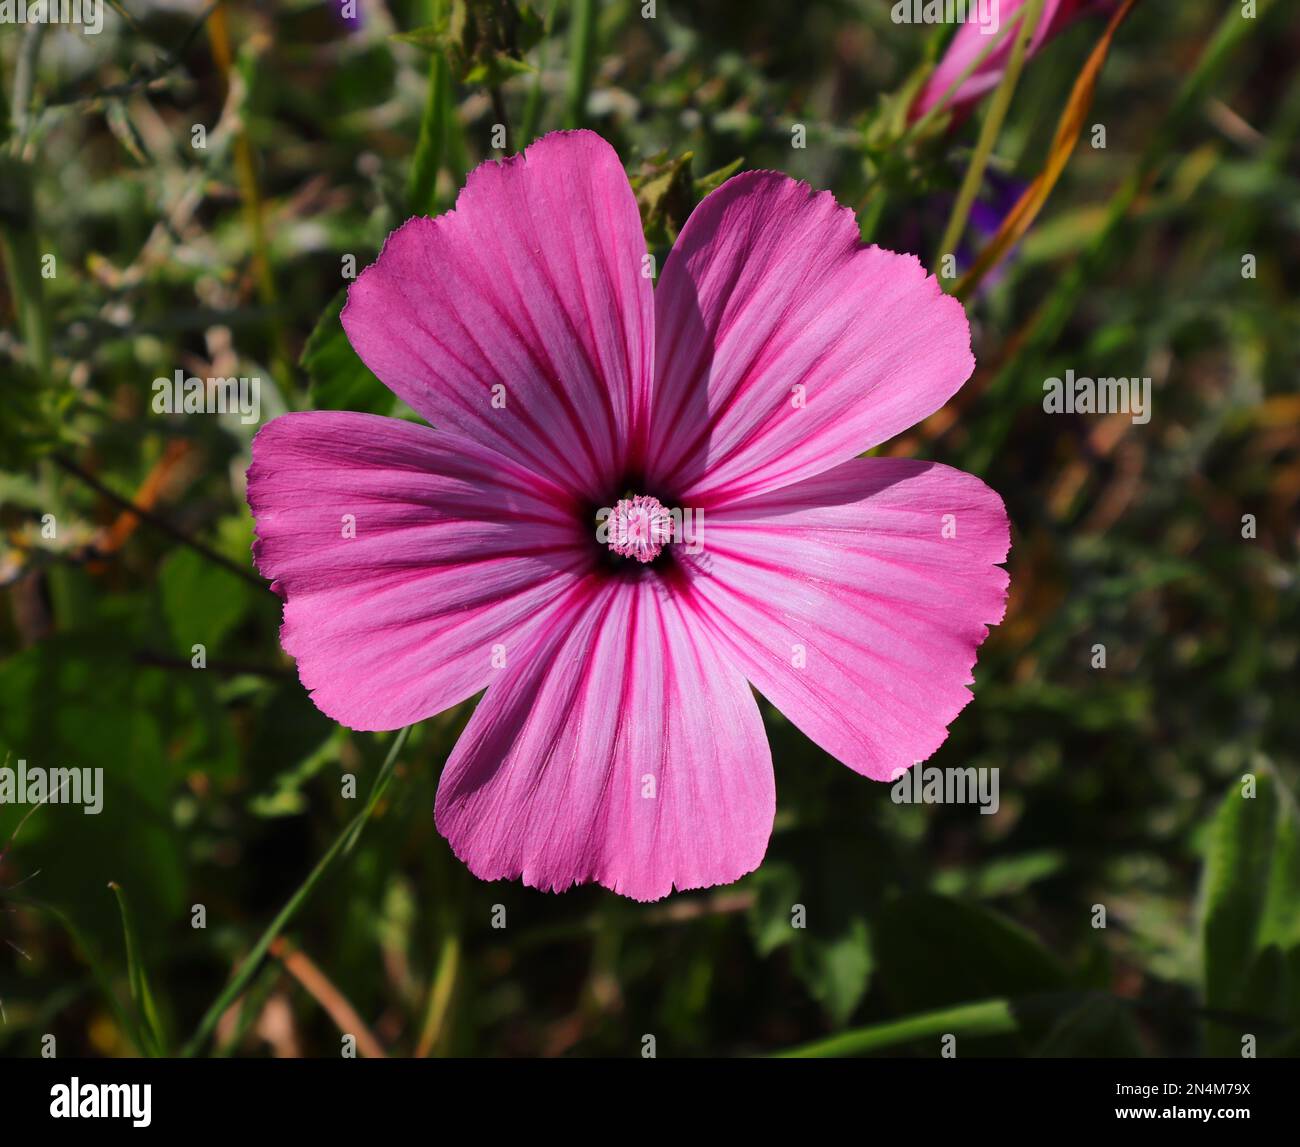 Spring, Portugal. Solitary Annual Mallow also known as Rose Mallow or Royal Mallow. Lavatera rosa in natural surroundings. Malvaceae Family. Stock Photo